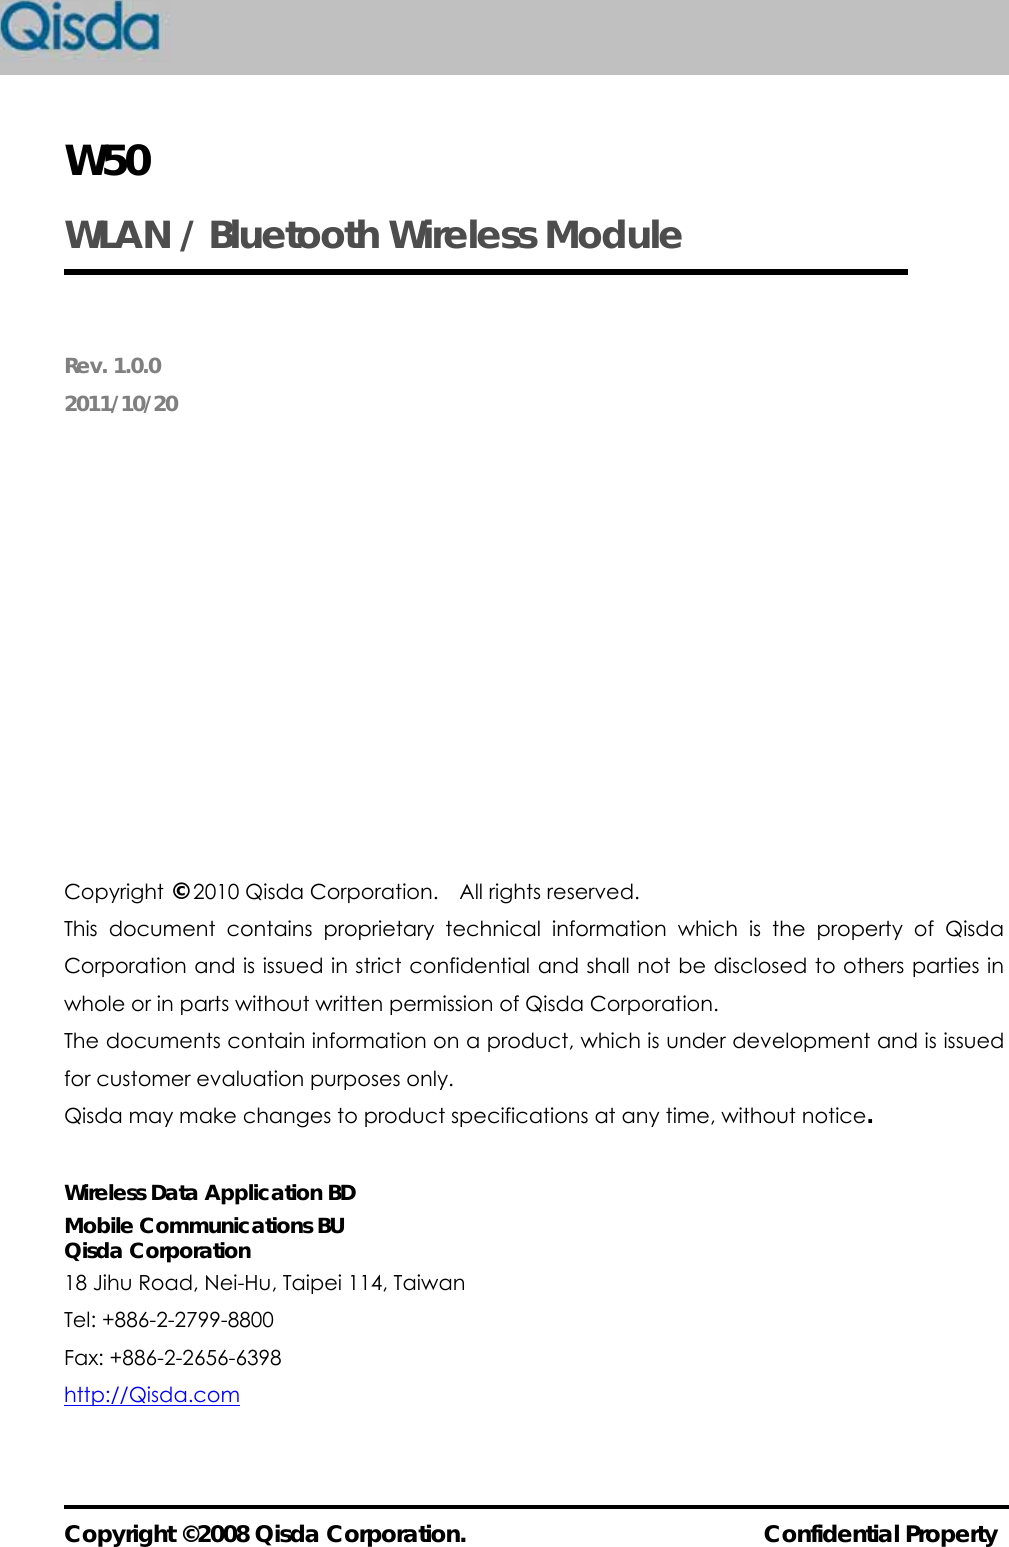  Copyright ©2008 Qisda Corporation.                          Confidential Property W50 WLAN / Bluetooth Wireless Module  Rev. 1.0.0 2011/10/20             Copyright © 2010 Qisda Corporation.    All rights reserved. This document contains proprietary technical information which is the property of Qisda Corporation and is issued in strict confidential and shall not be disclosed to others parties in whole or in parts without written permission of Qisda Corporation. The documents contain information on a product, which is under development and is issued for customer evaluation purposes only.   Qisda may make changes to product specifications at any time, without notice.  Wireless Data Application BD Mobile Communications BU Qisda Corporation 18 Jihu Road, Nei-Hu, Taipei 114, Taiwan Tel: +886-2-2799-8800 Fax: +886-2-2656-6398 http://Qisda.com 